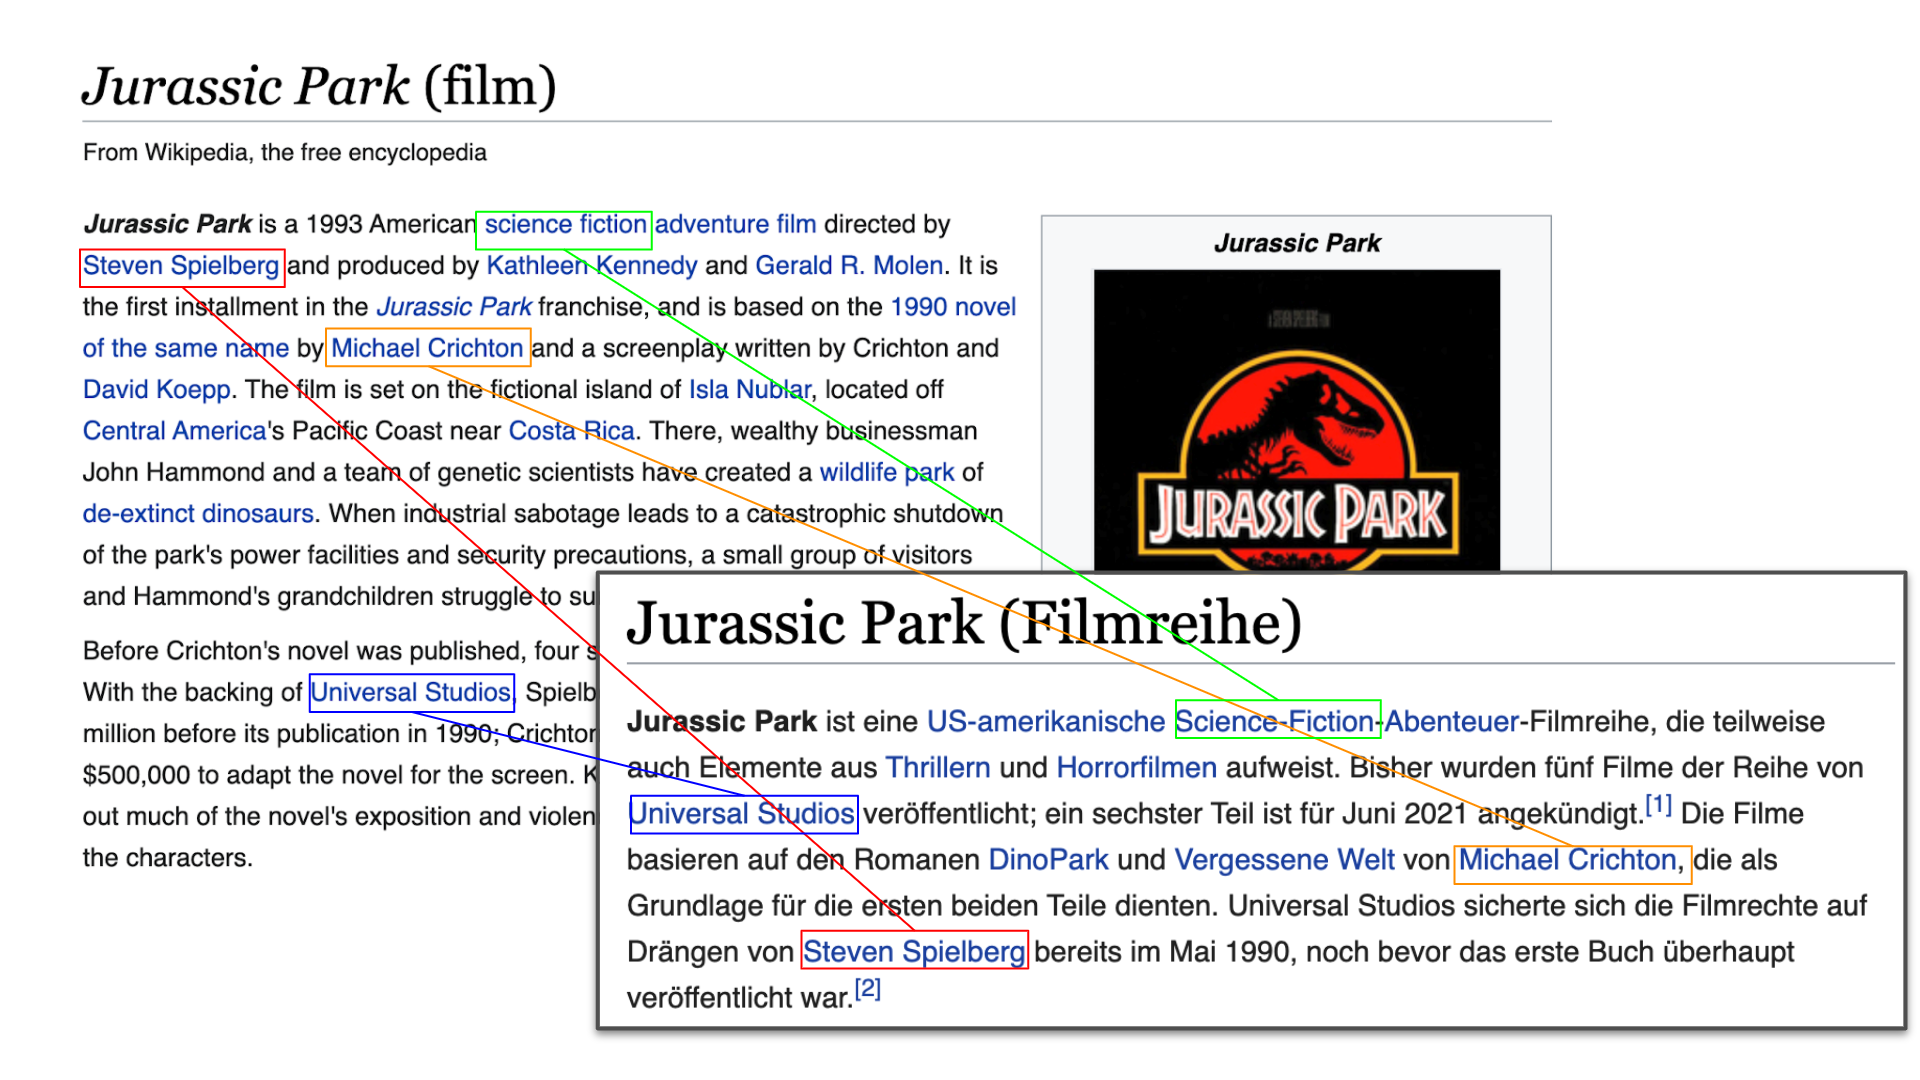 Jurassic Park article in different languages